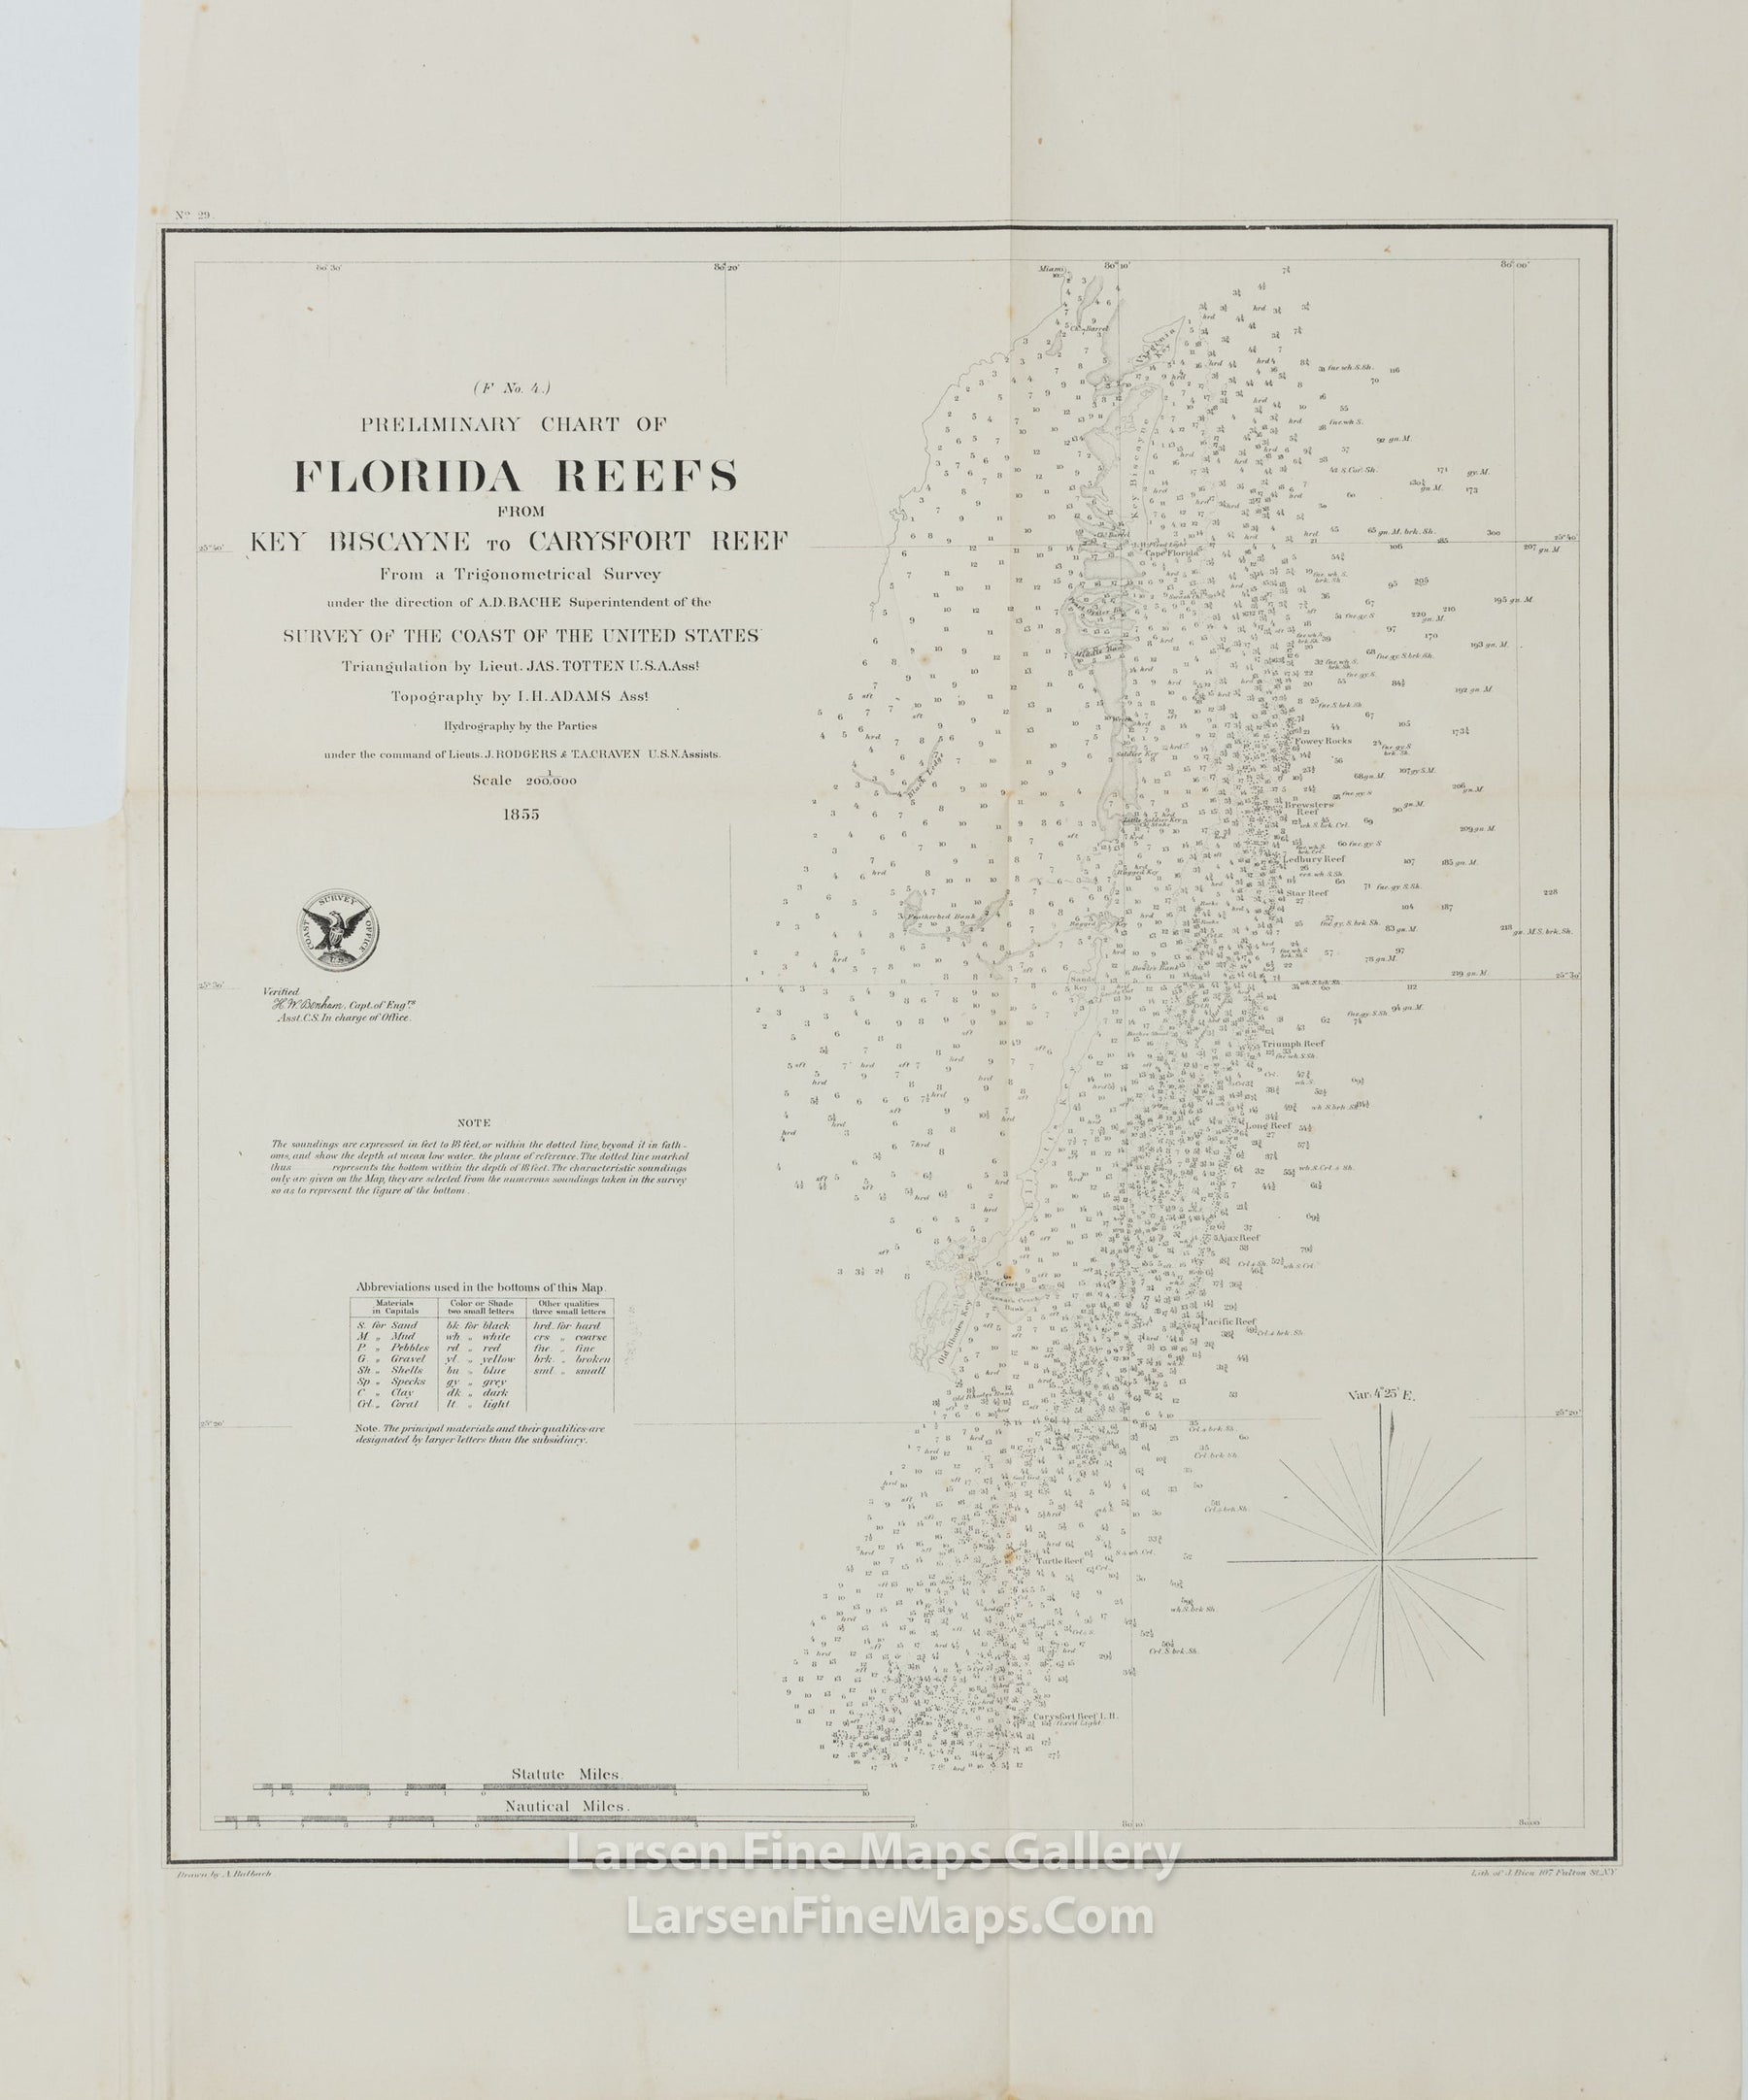 Preliminary Chart of Florida Reefs from Key Biscayne to Carysfort Reef